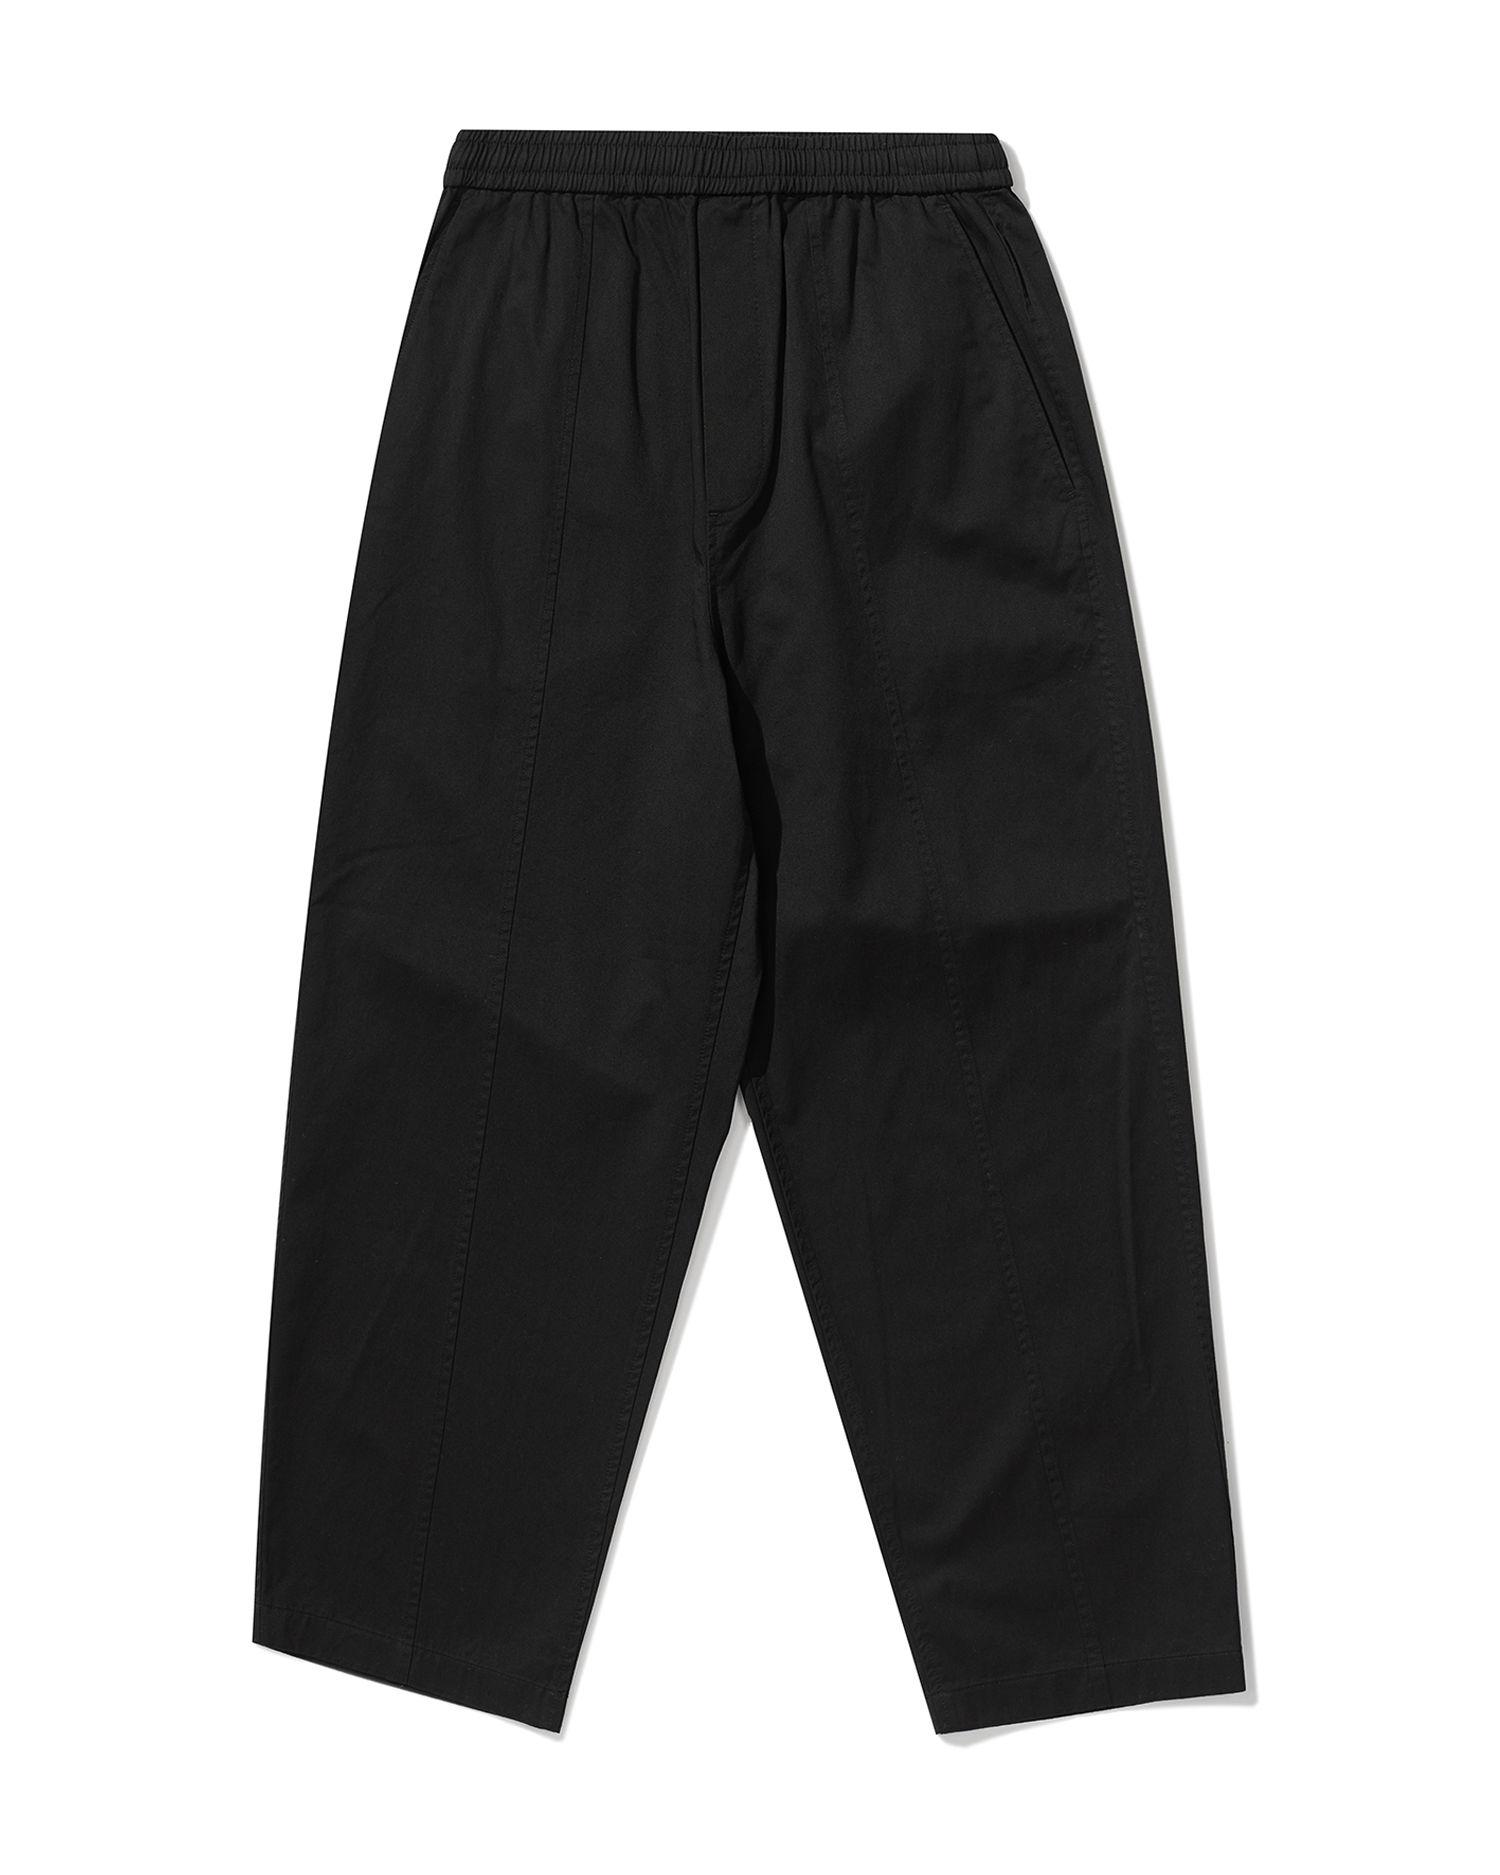 Low-crotch cropped pants by COVERNAT